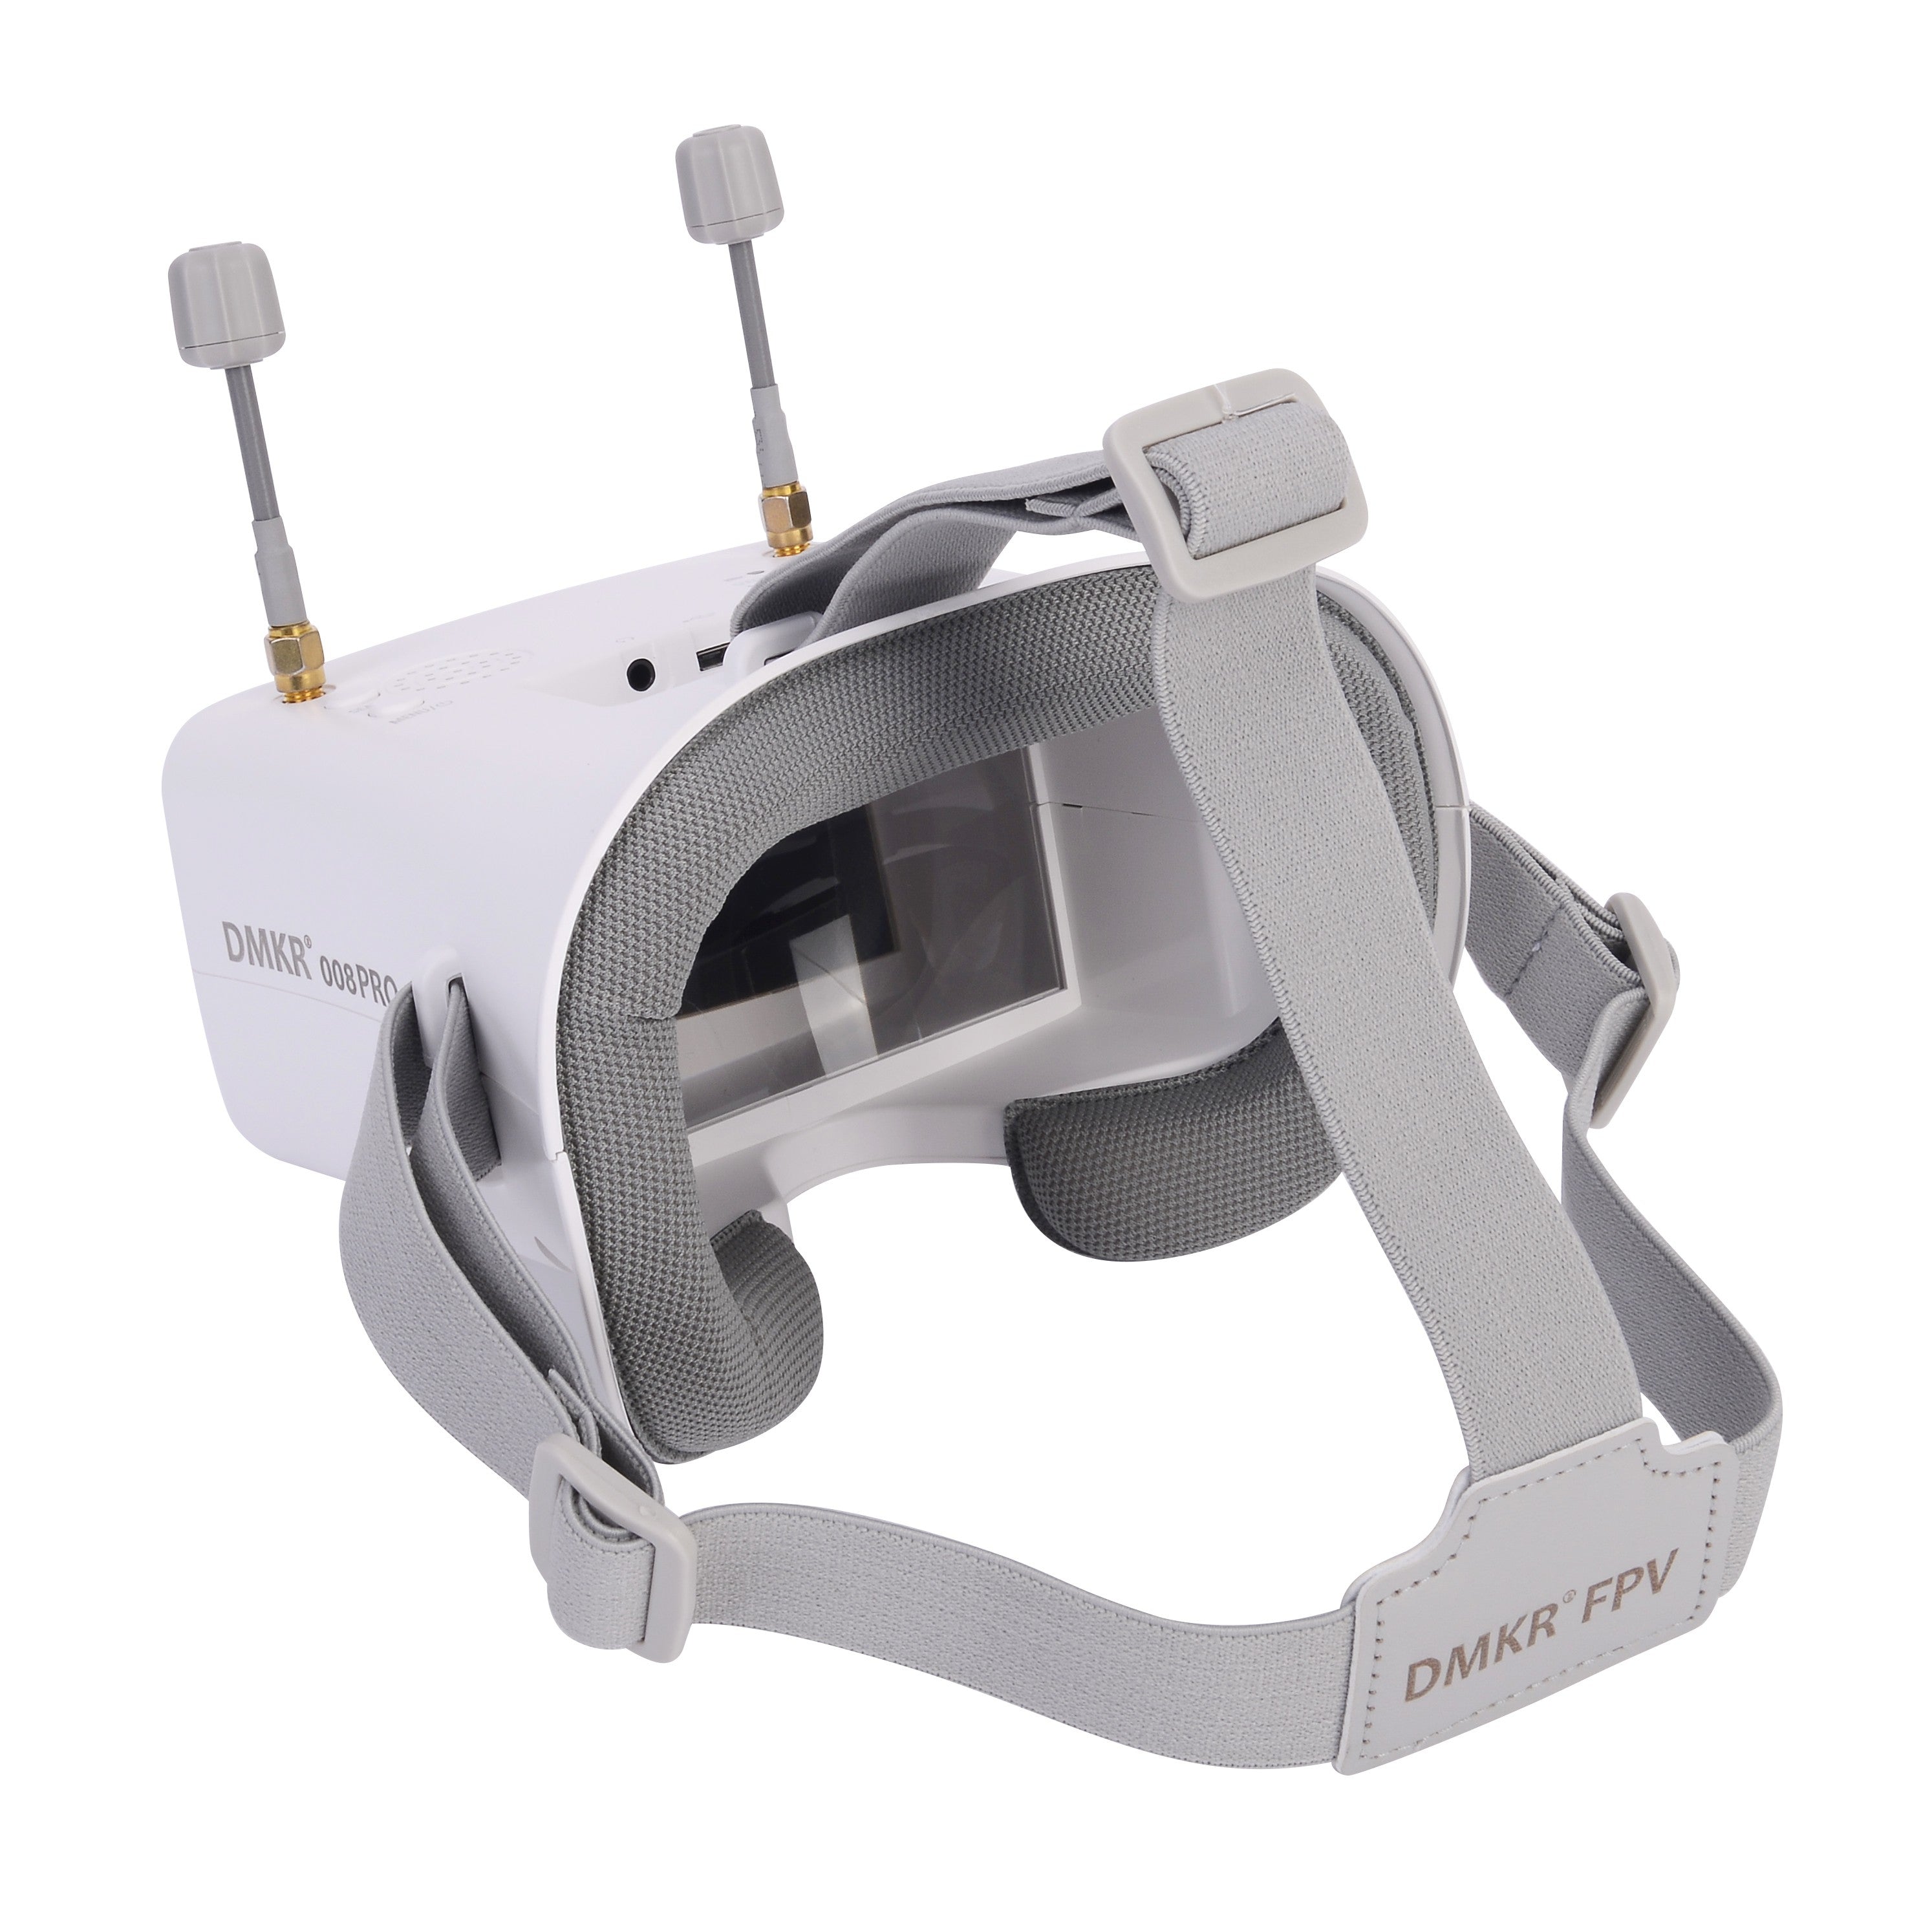 4.3 Inch FPV Goggles with DVR Function